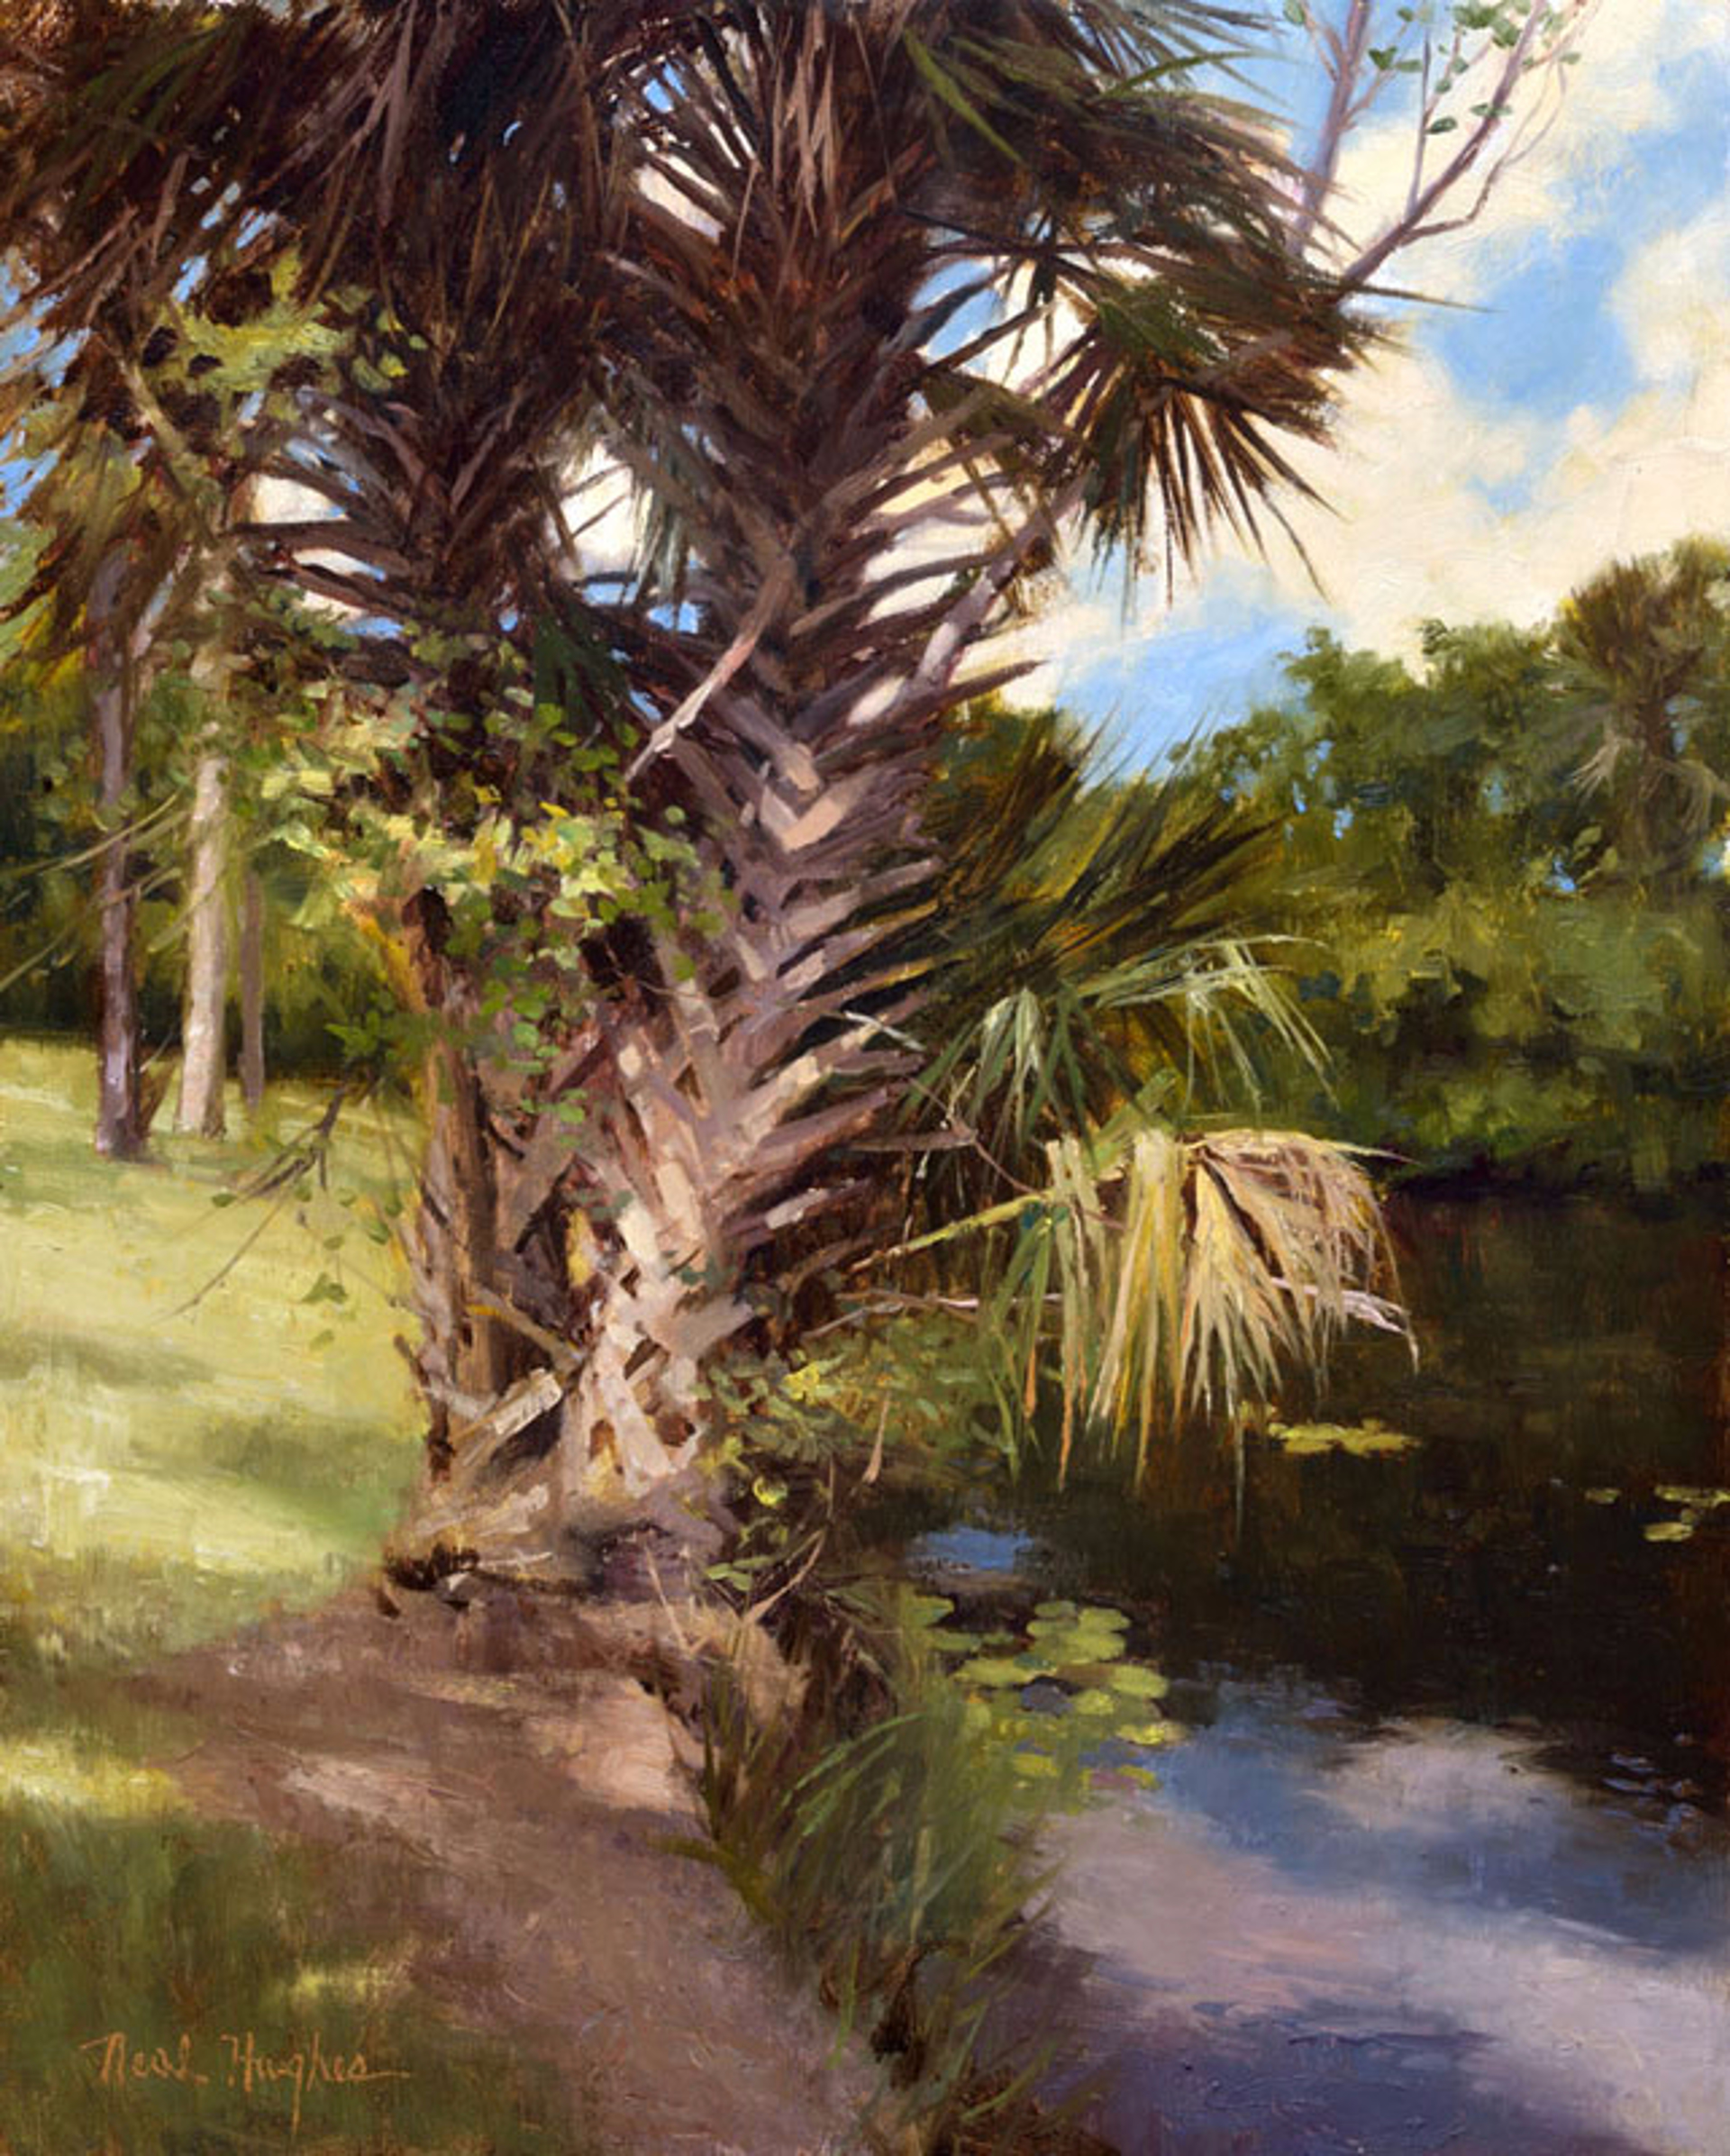 River Palm by Neal Hughes